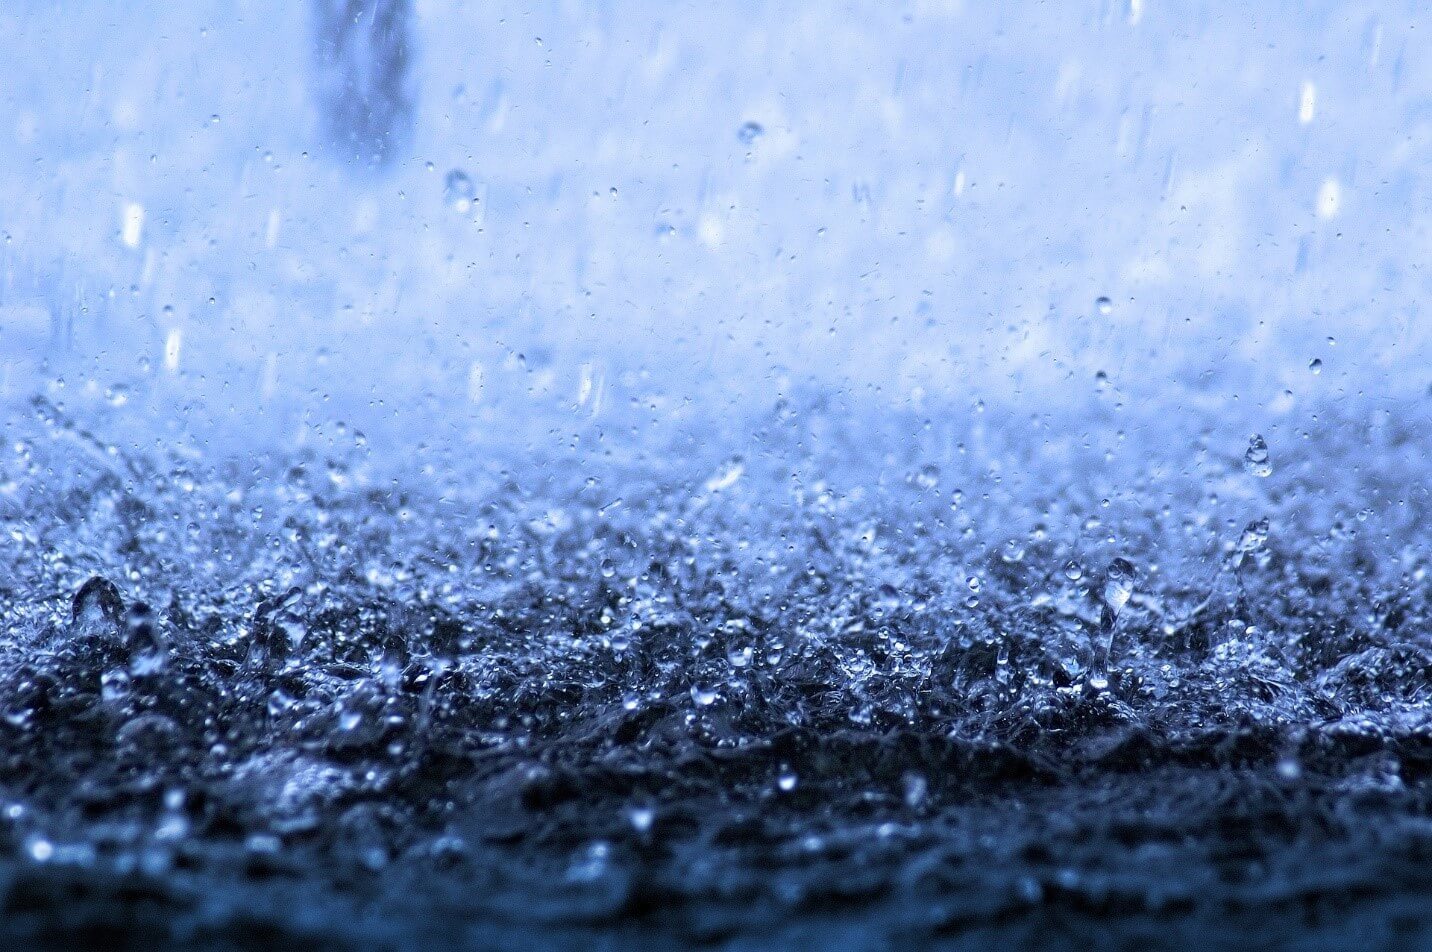 Precipitation is simple a measurement of the amount of water that fell in a given period.